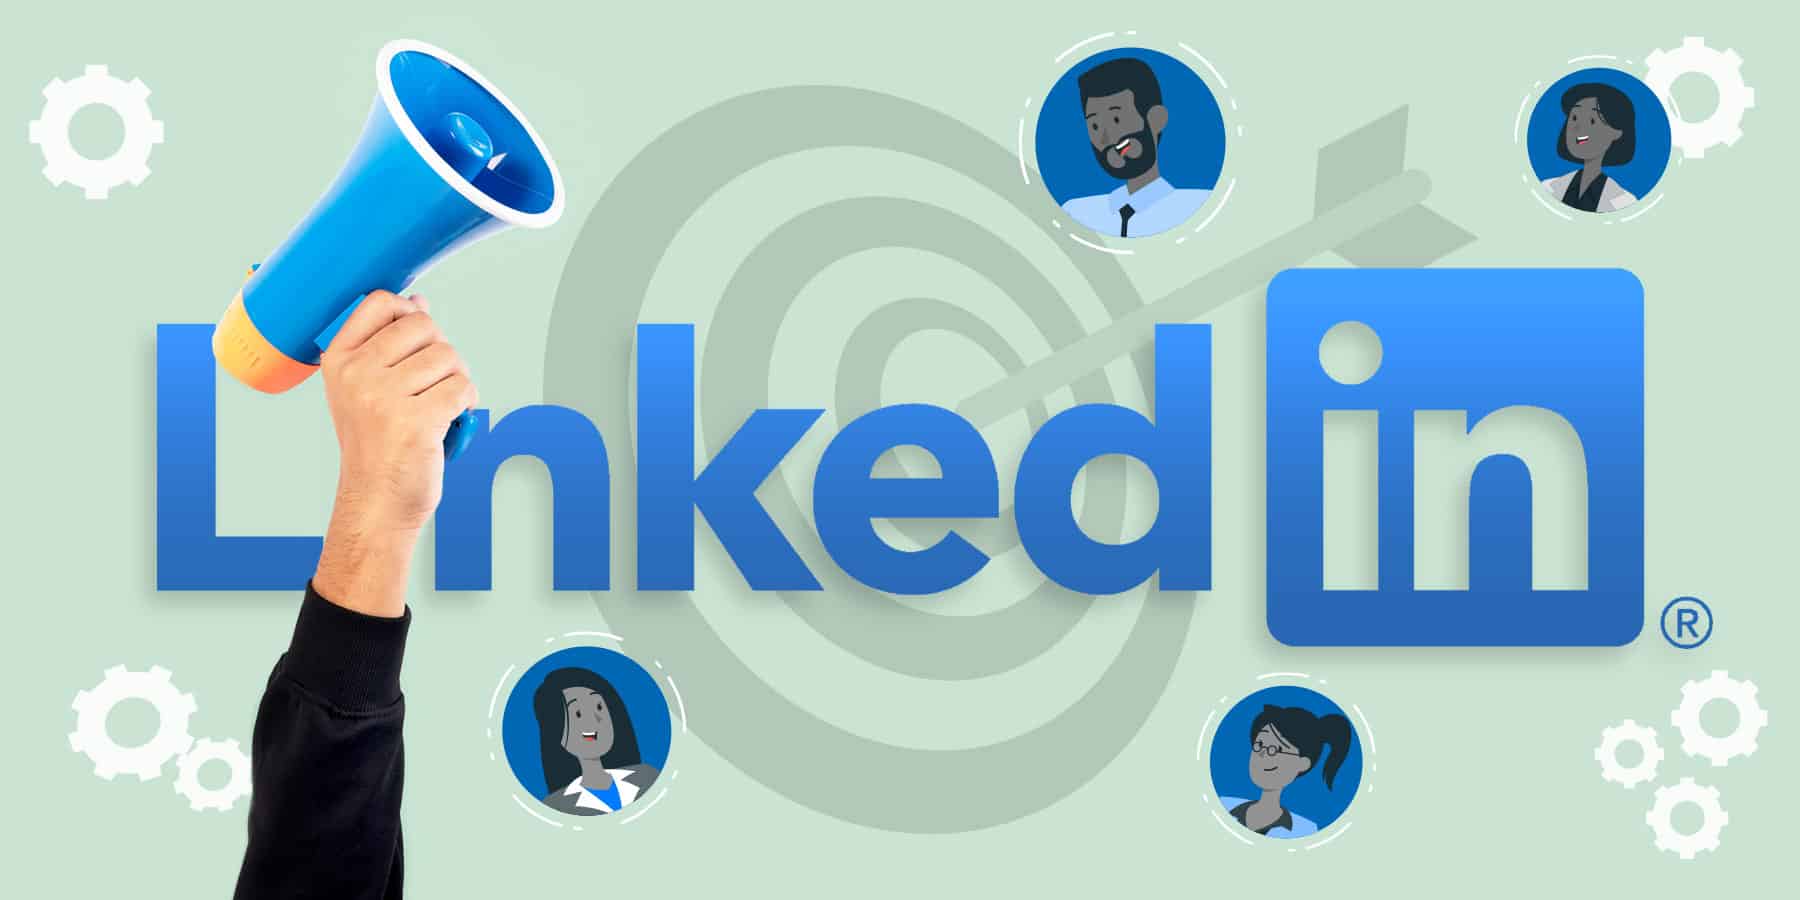 How to Generate LinkedIn Leads Like a Pro